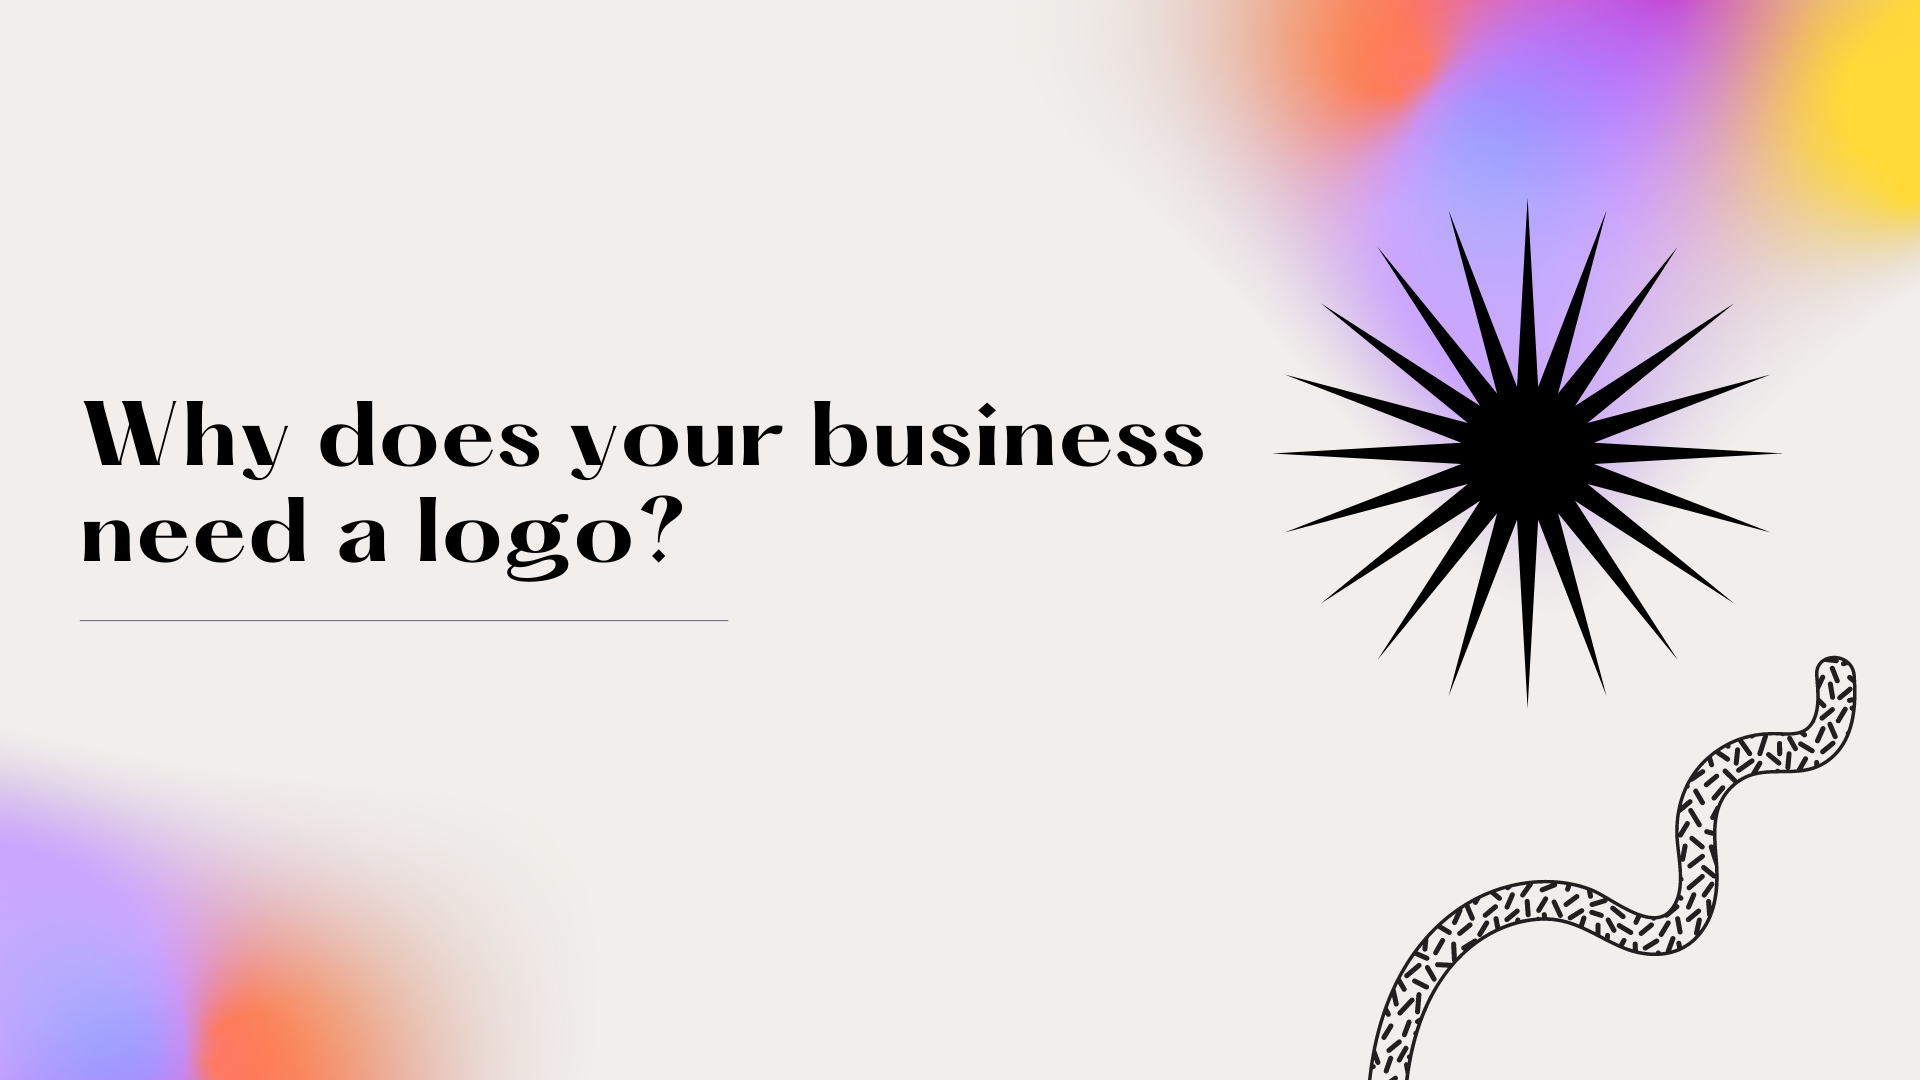 Why does your business need a logo?